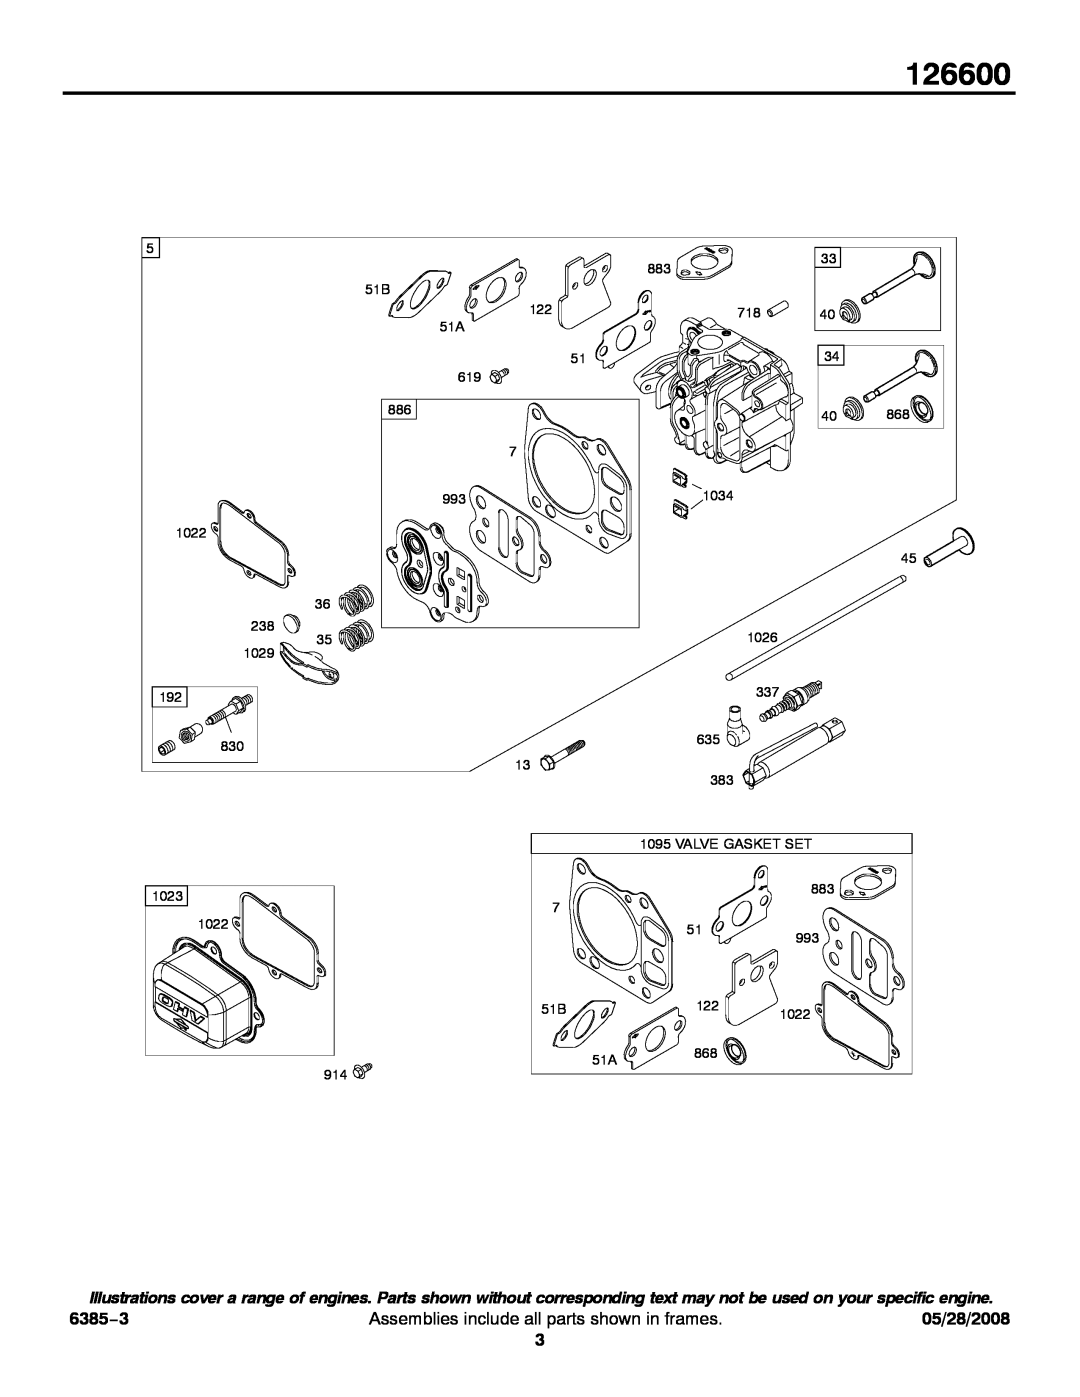 Briggs & Stratton 126600 service manual 6385−3, Assemblies include all parts shown in frames, 05/28/2008 